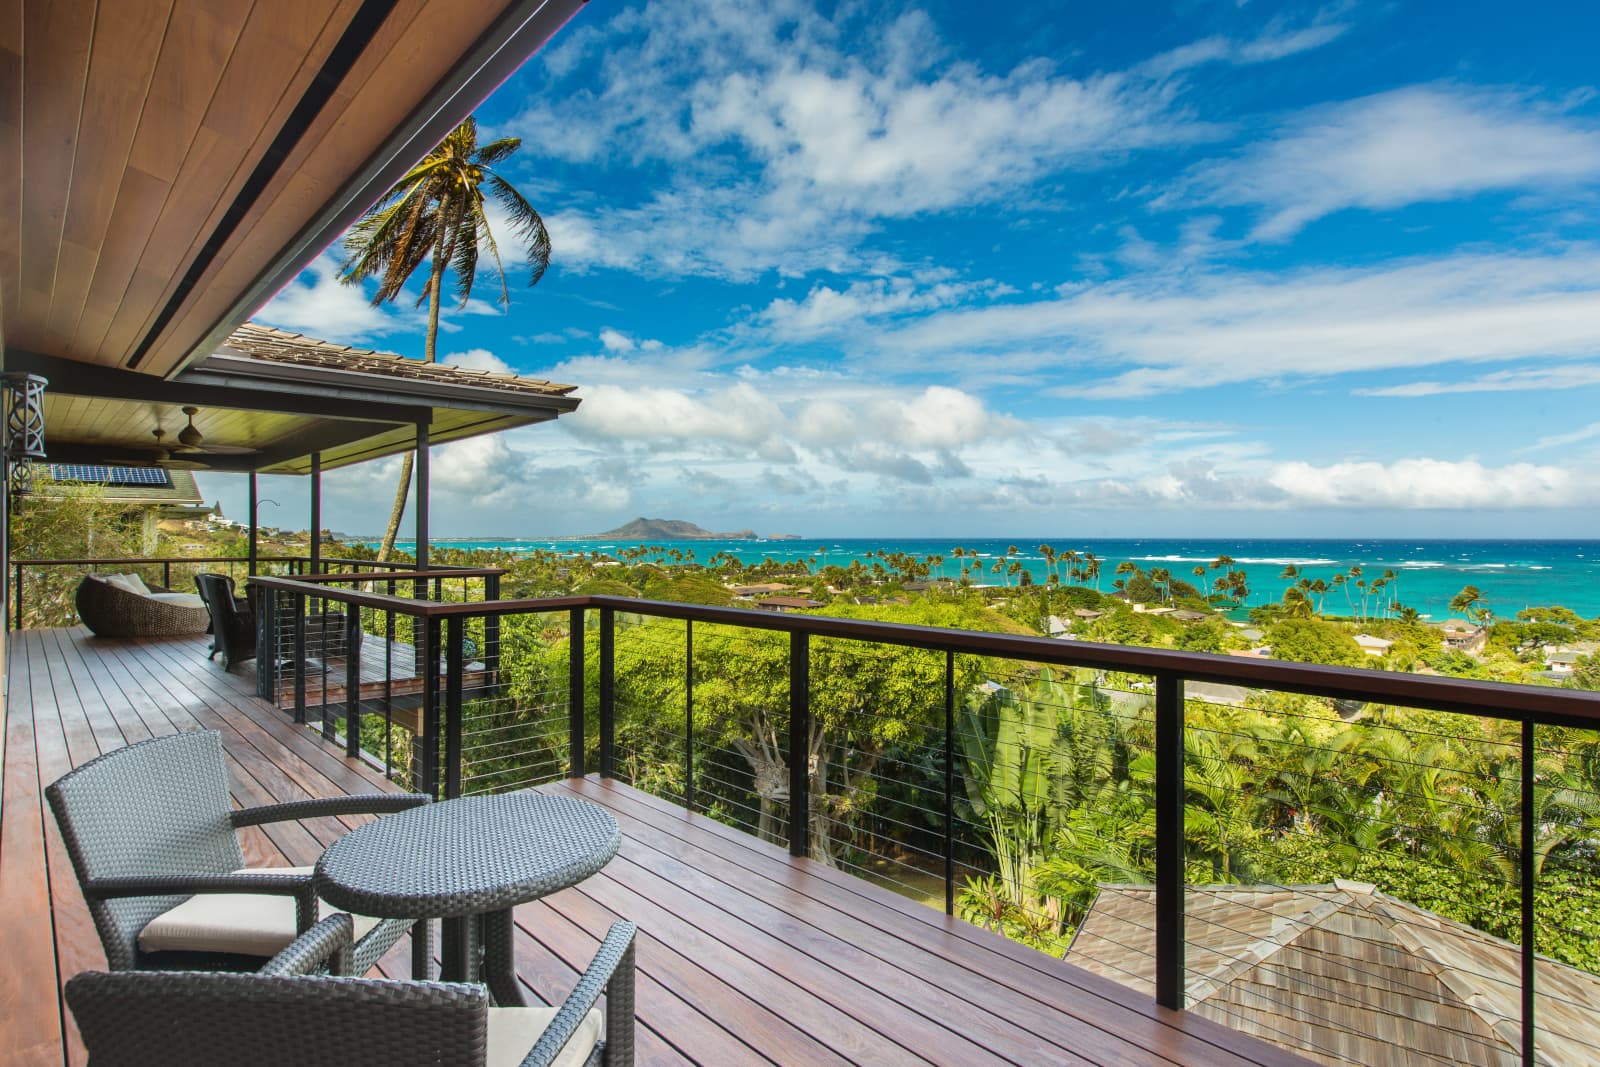 View off the porch of a home in Lanikai